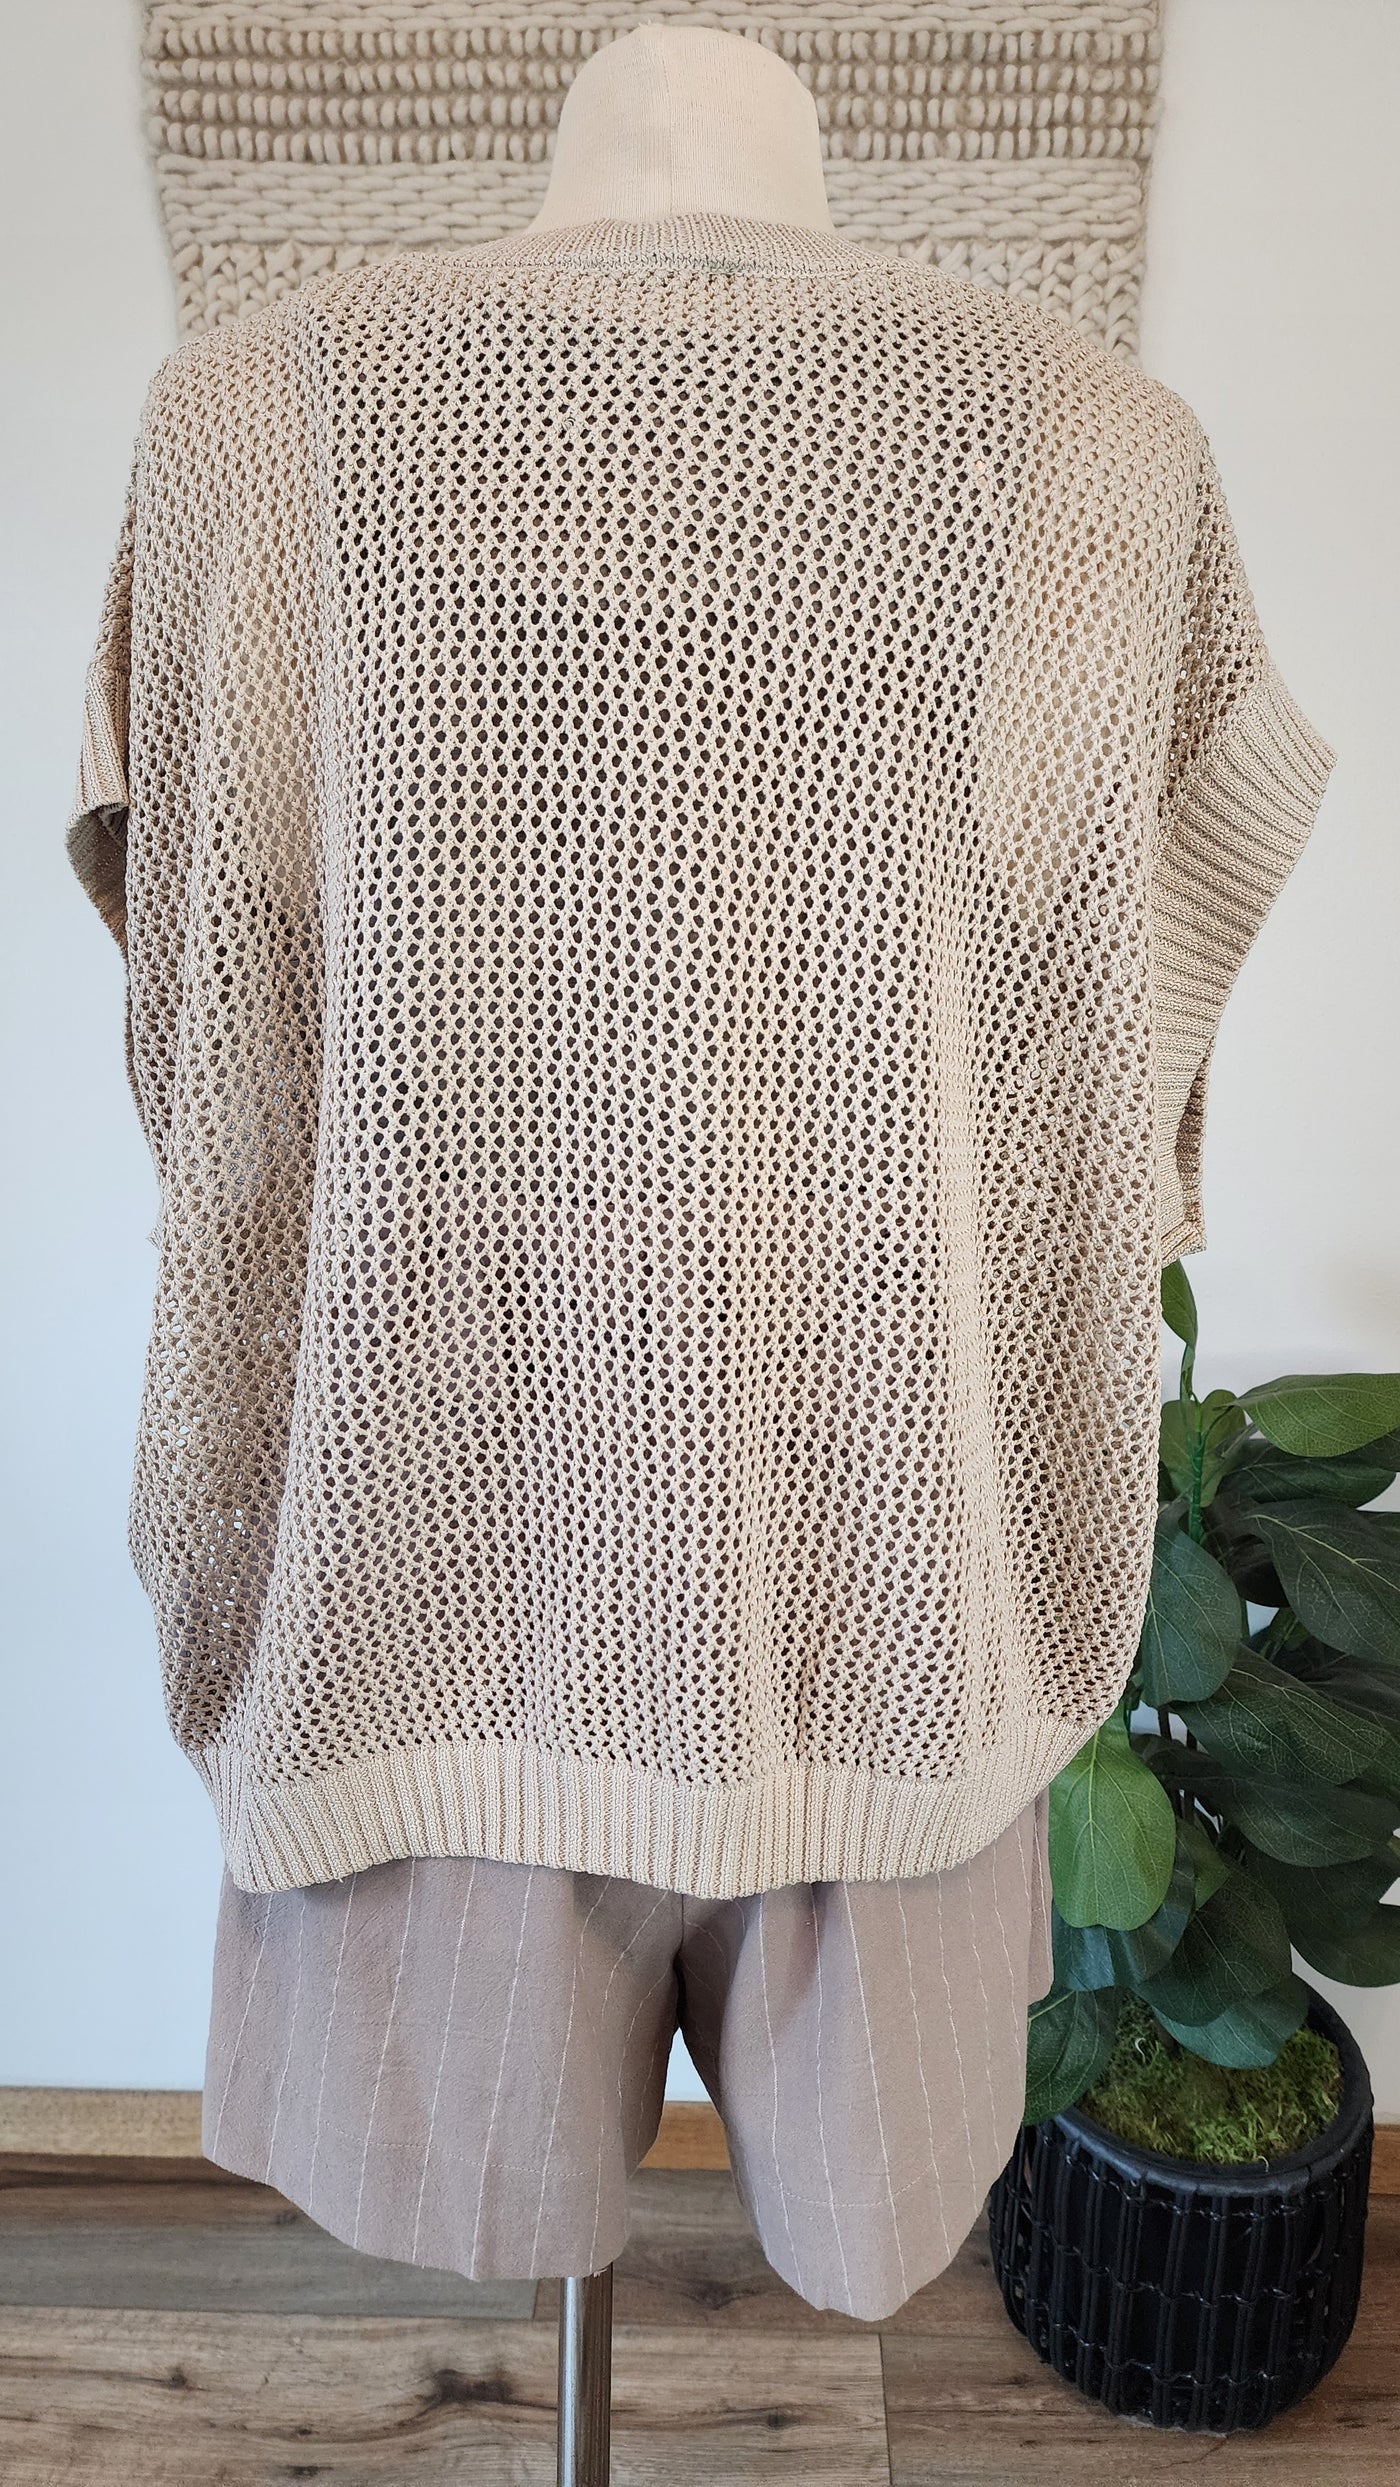 DARCY sweater top